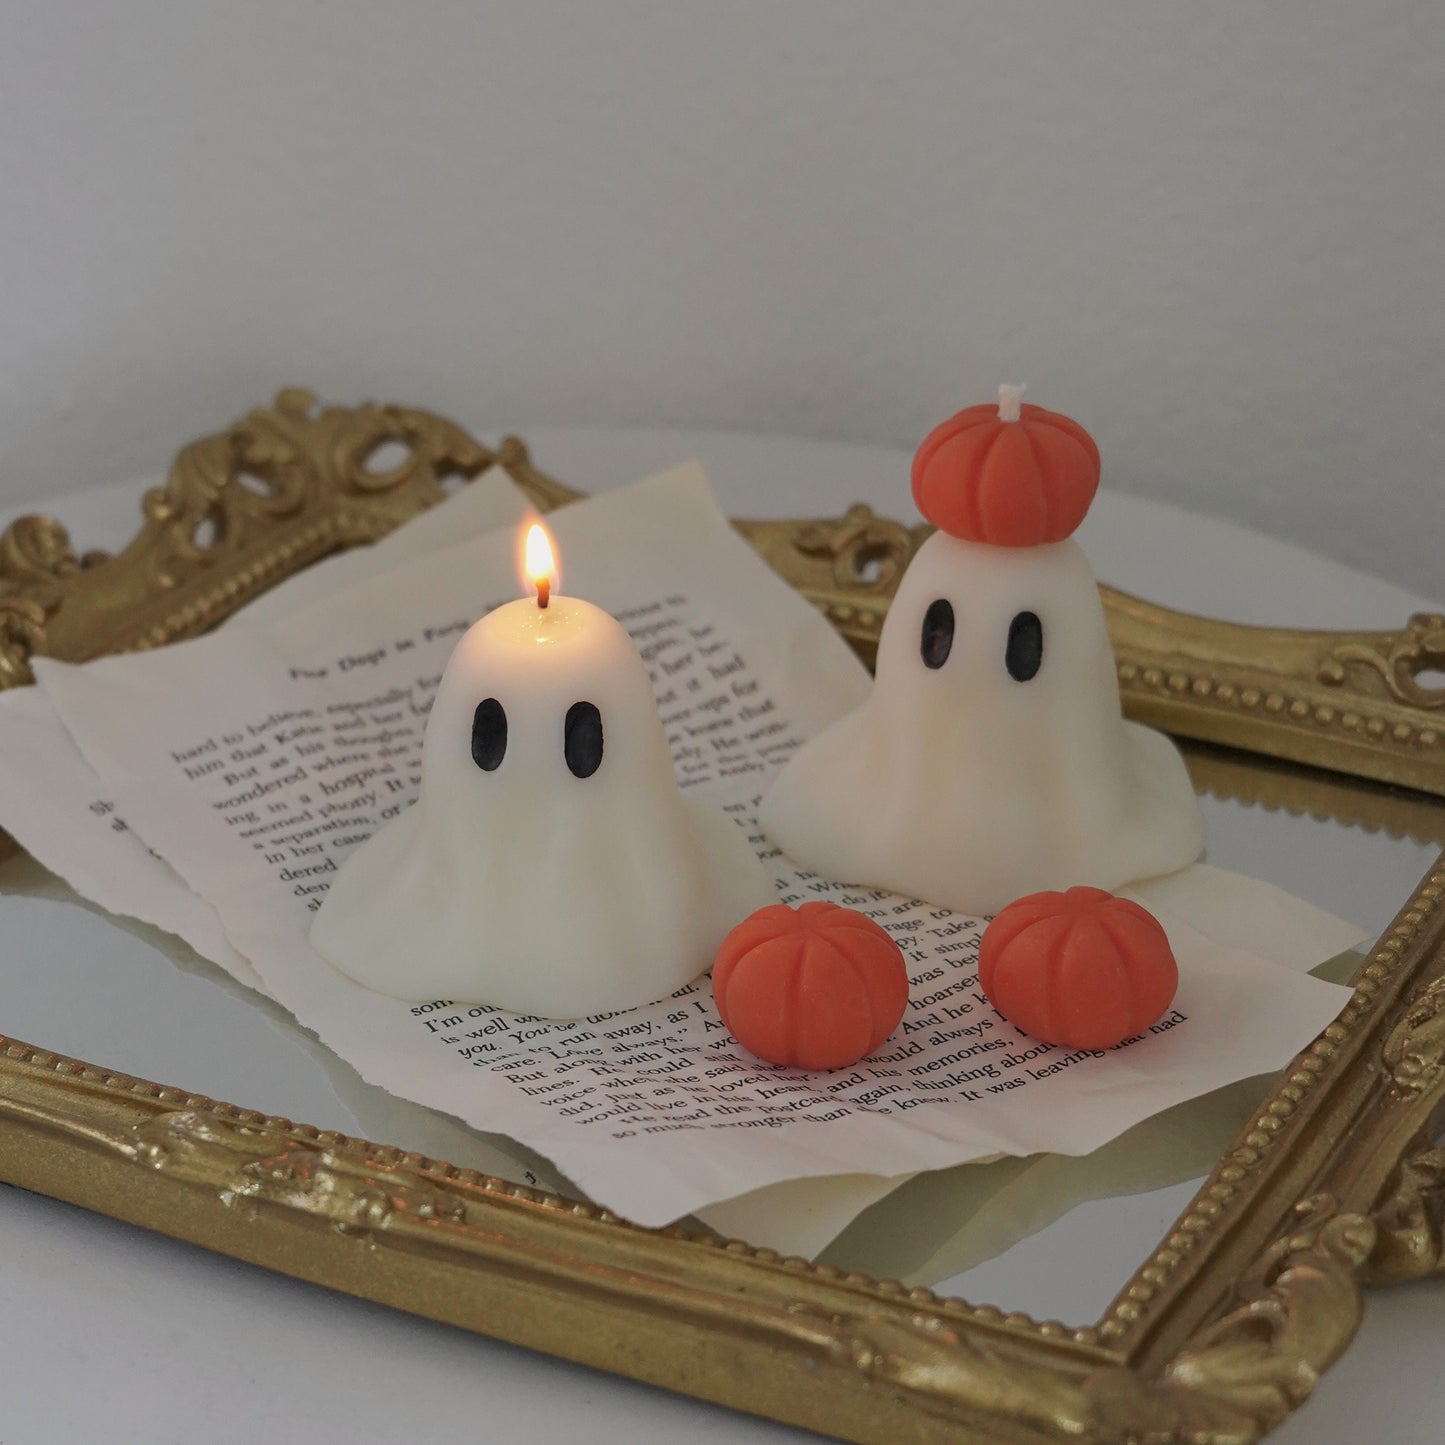 a lit ghost candle, pumpkin ghost candle, and pumpkin wax melts on book pages and rectangular gold french mirror tray